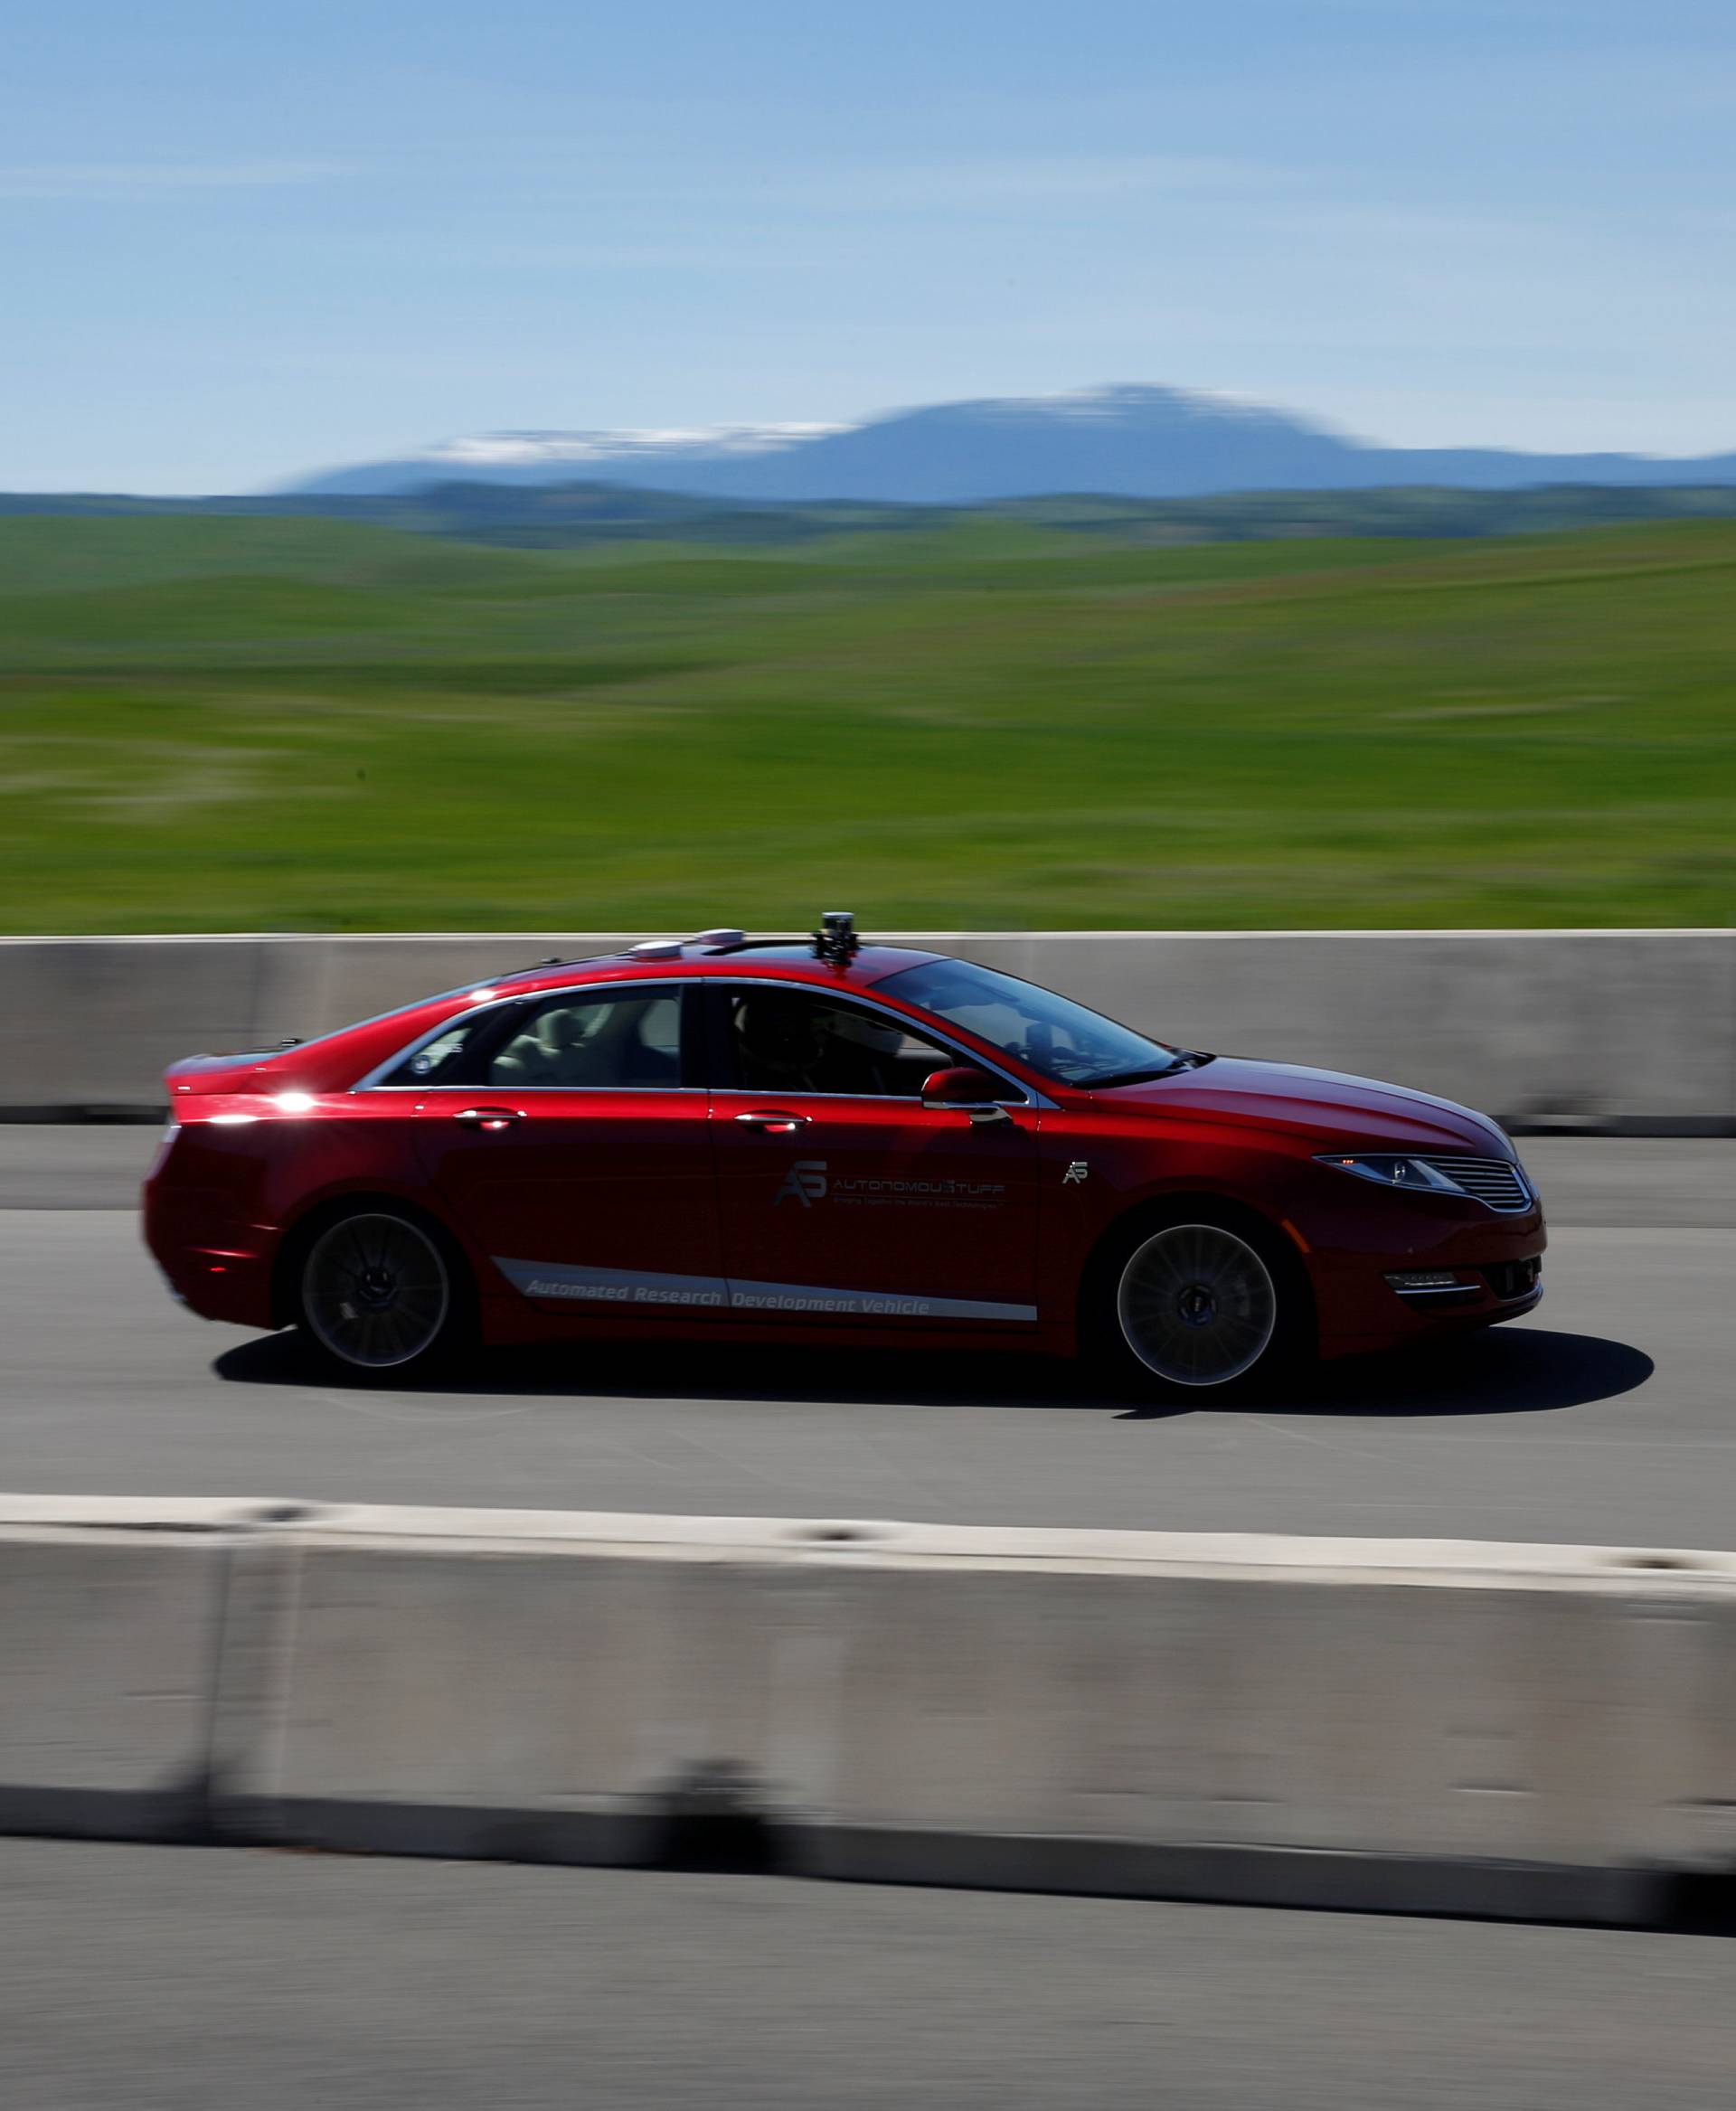 An AutonomouStuff Automated Research Development Vehicle drives on the race track during a self-racing cars event at Thunderhill Raceway in Willows, California